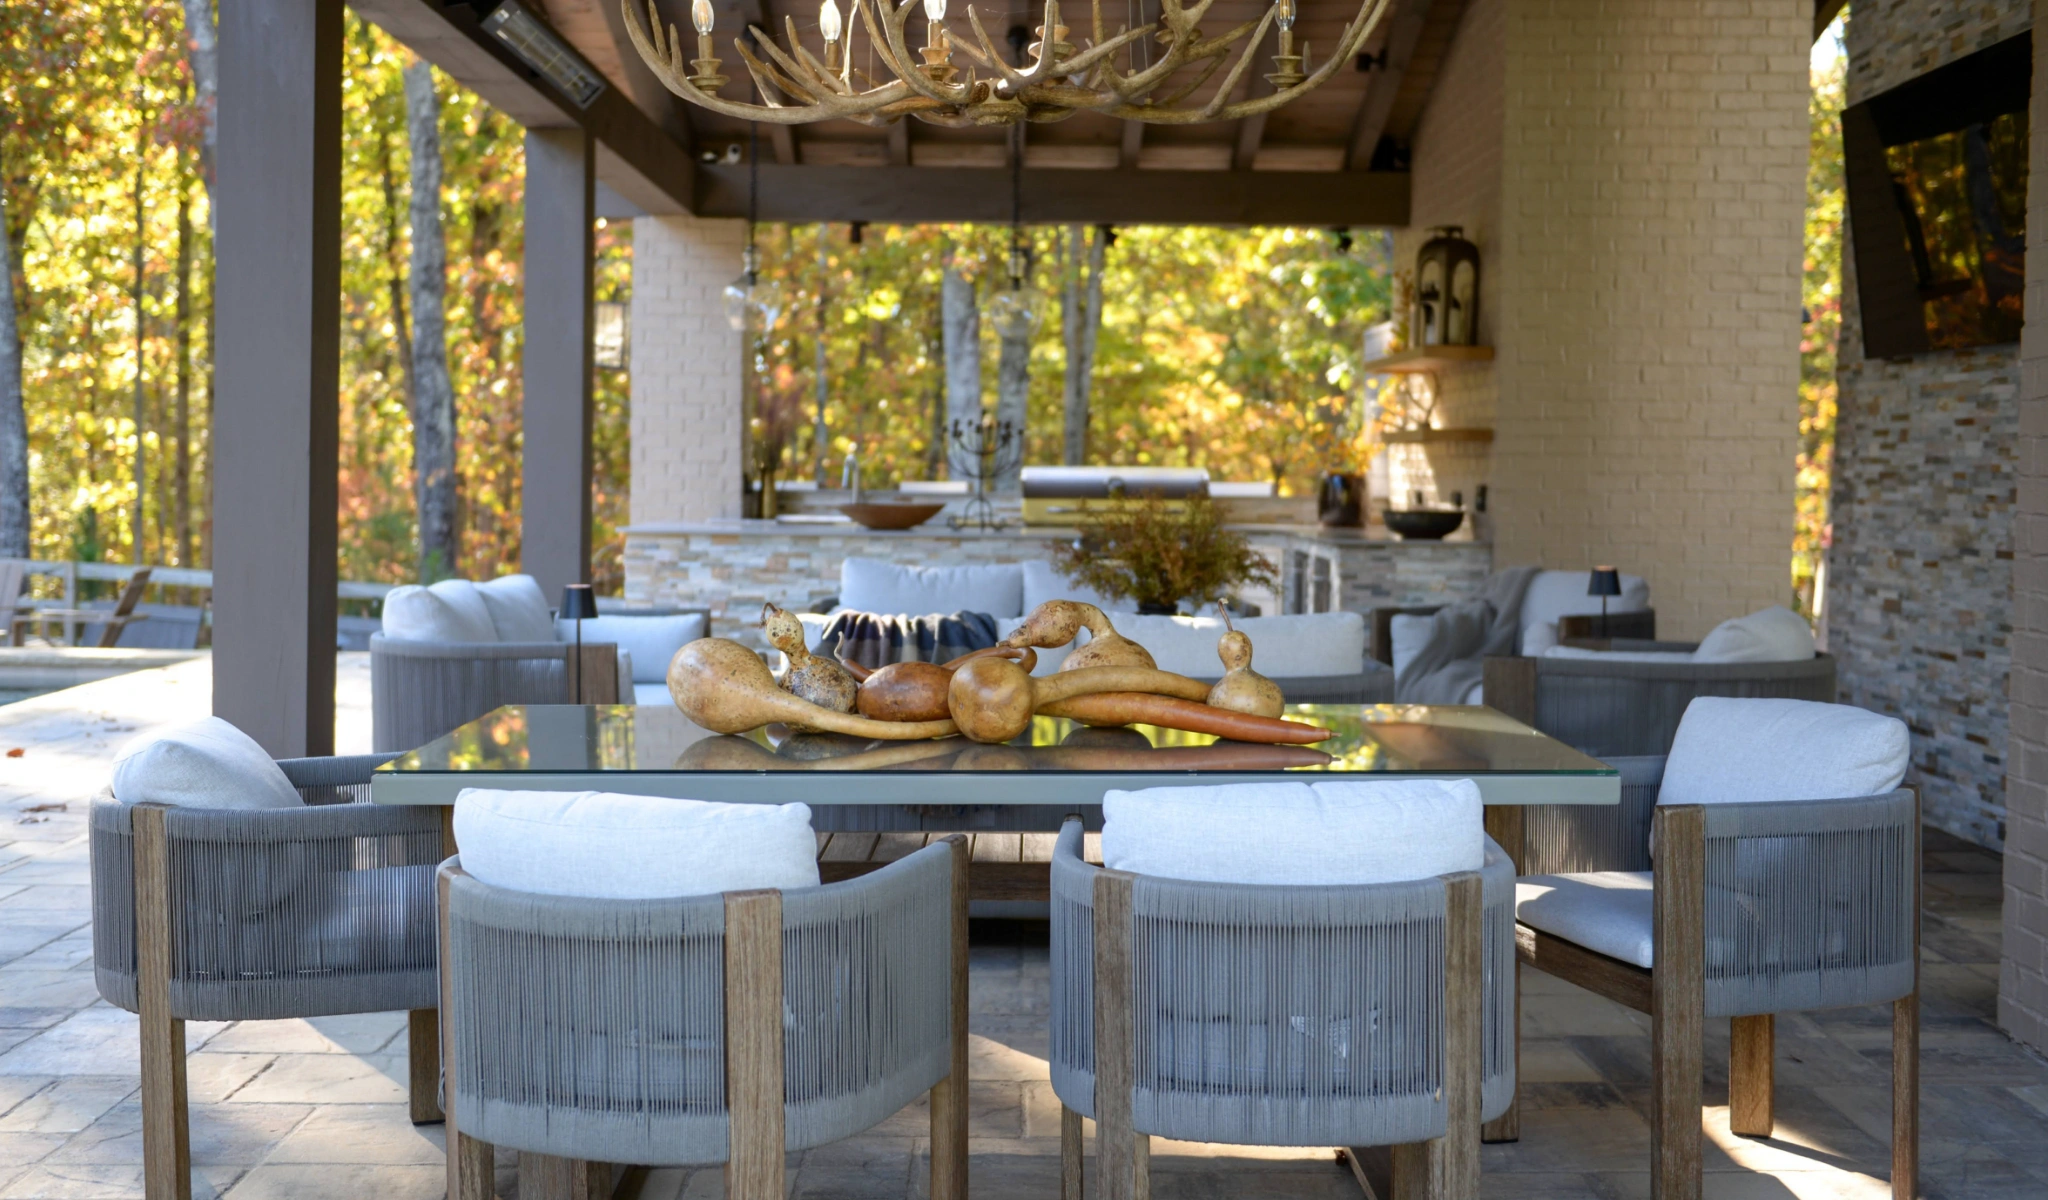 An outdoor dining area with a table and chairs perfect for enjoying meals in the open air.